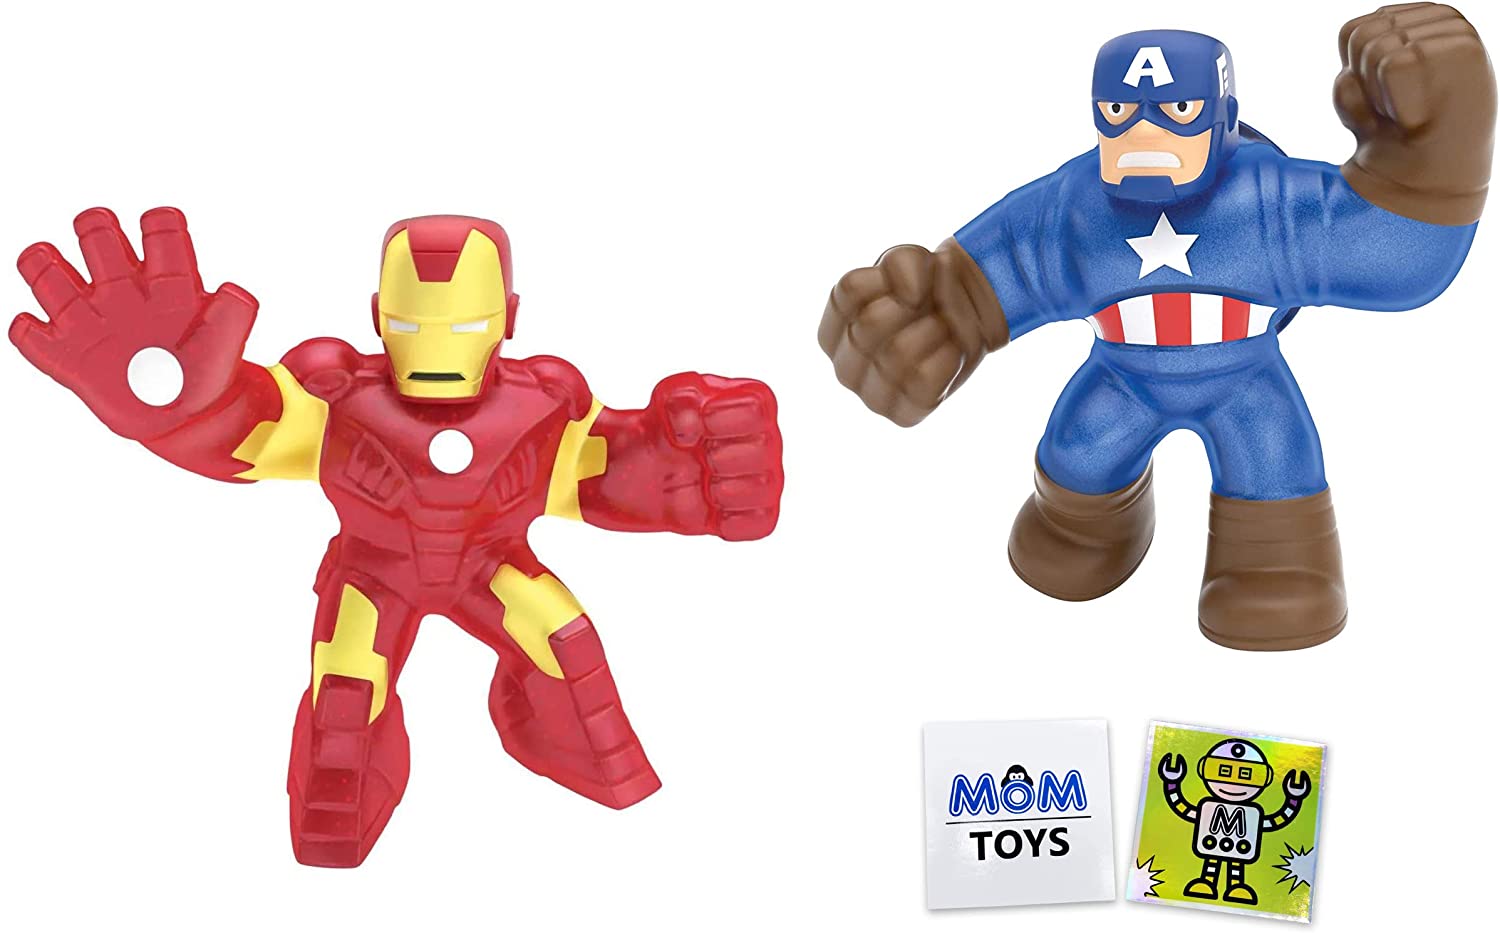 Marvel Heroes of Goo JIT Zu 2 Pack with Iron Man, Captain America and 2 My Outlet Mall Stickers